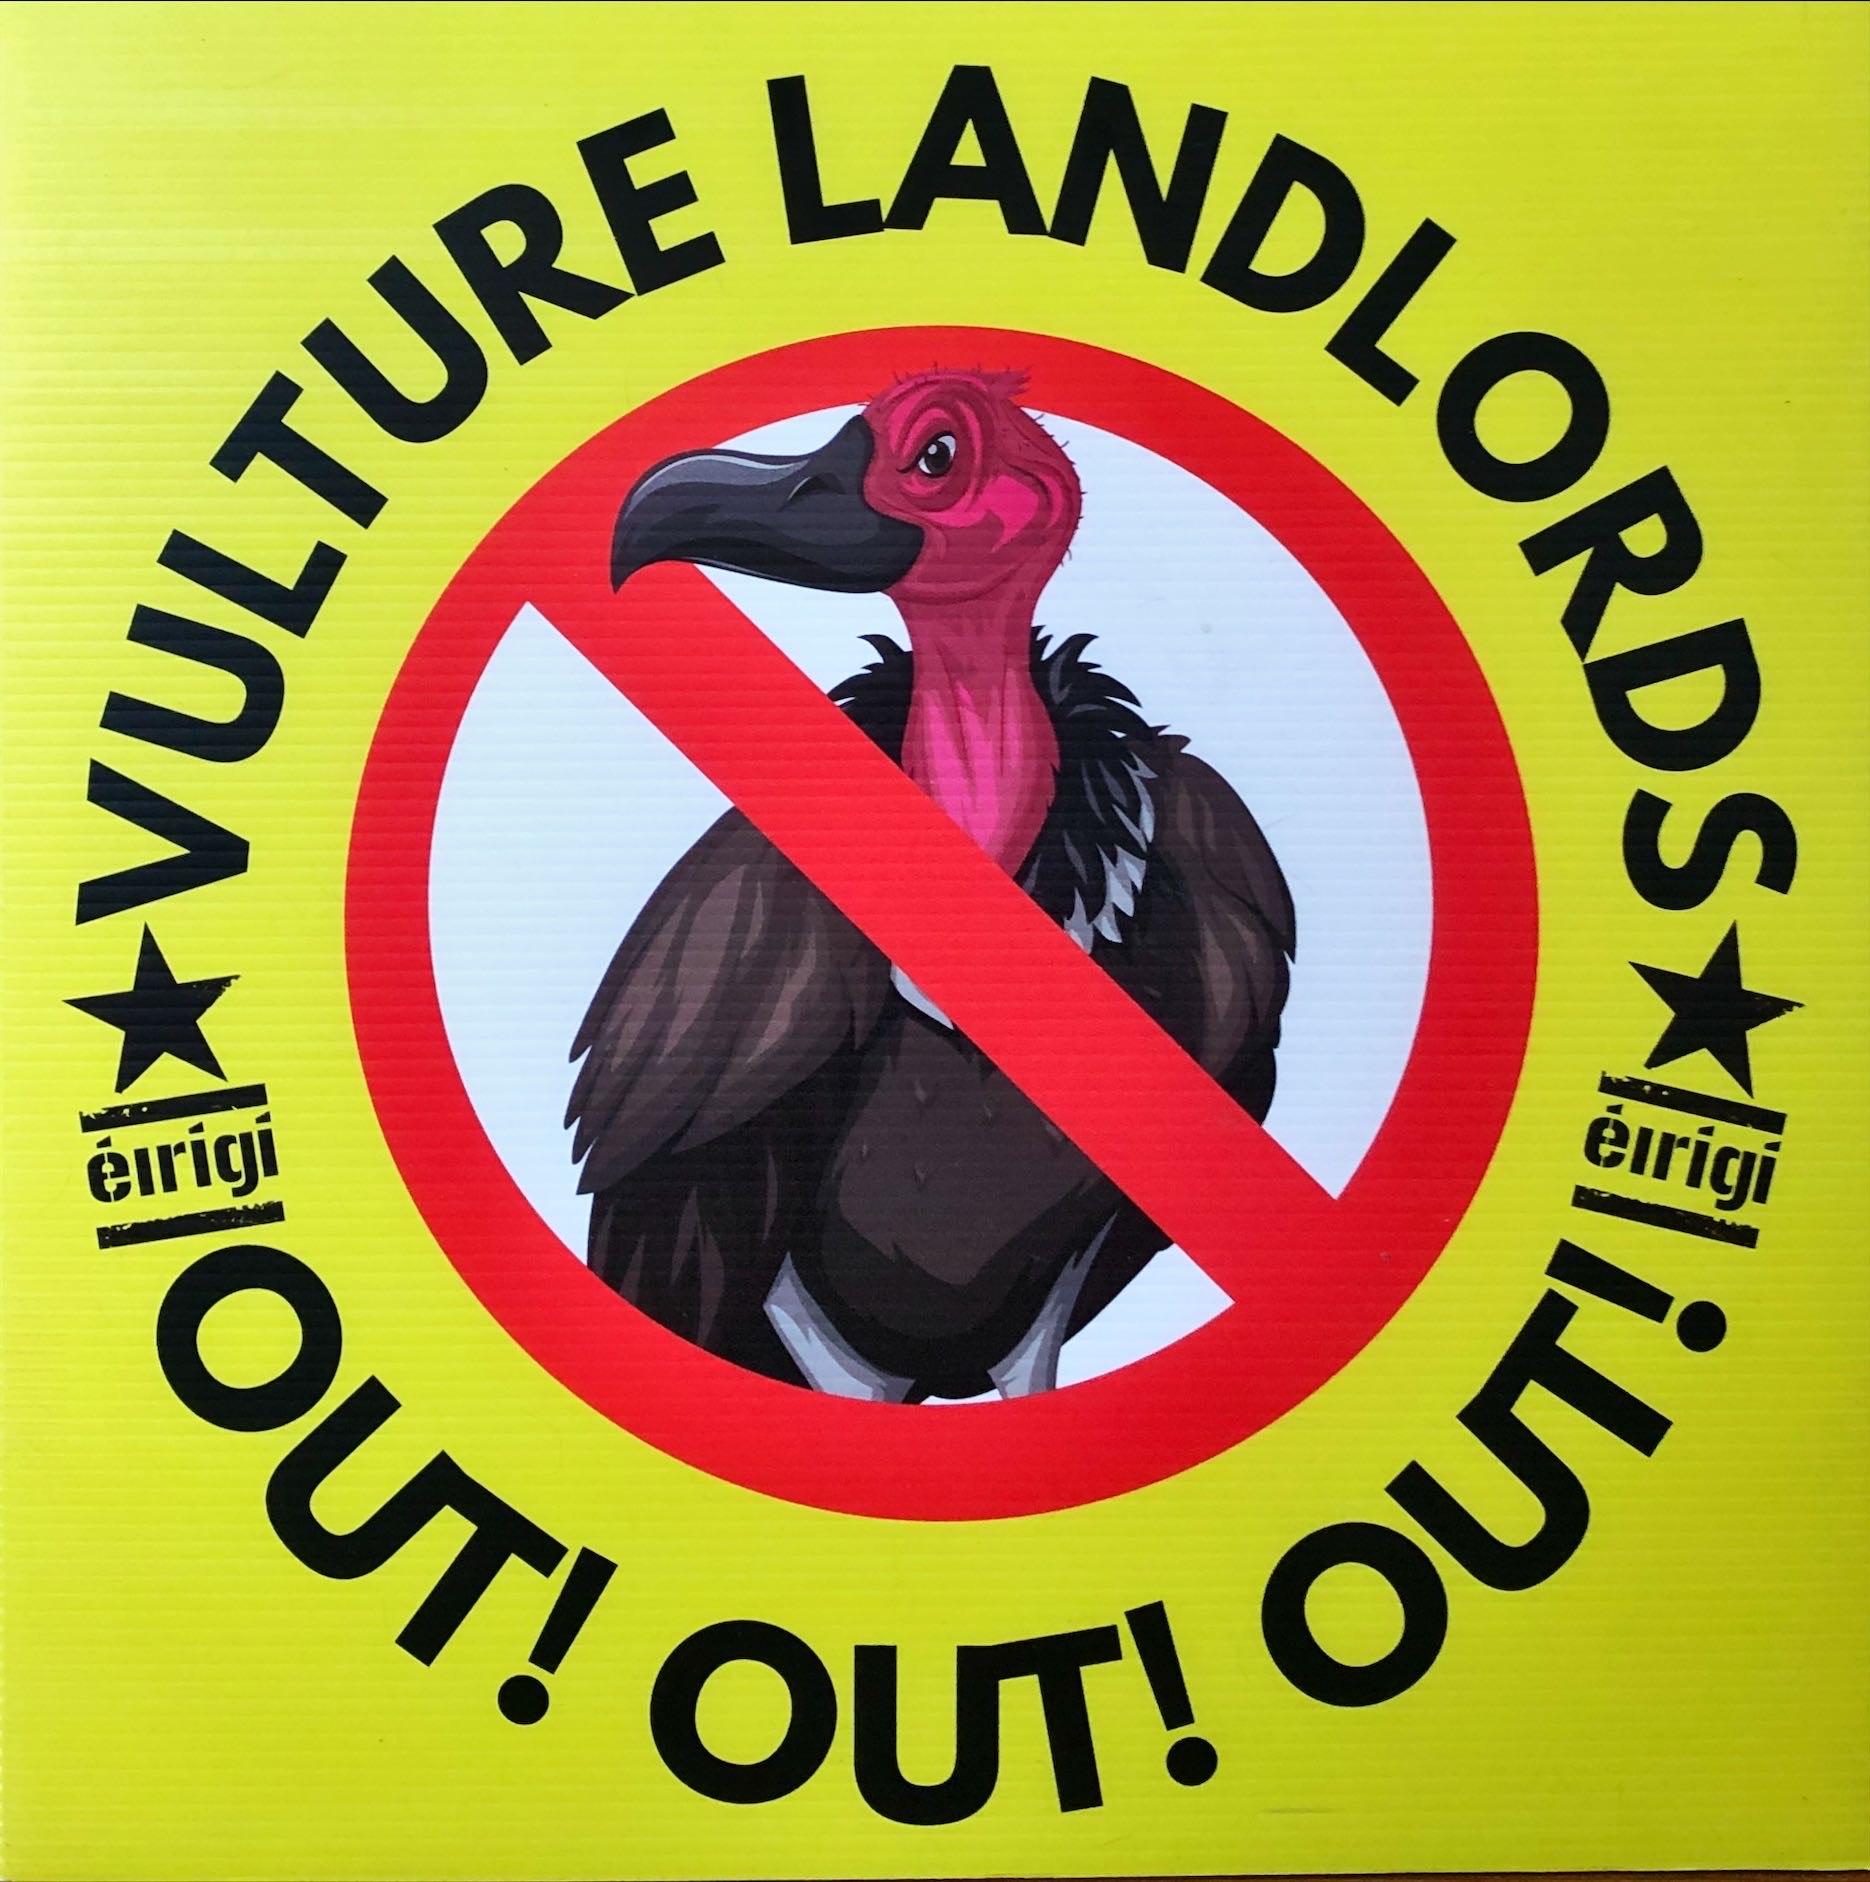 A poster with a cartoon image of a vulture in a red circle with a line through it. Around the circle is the text: Vulture Landlords Out! Out! Out! and the logo of Éirígí.